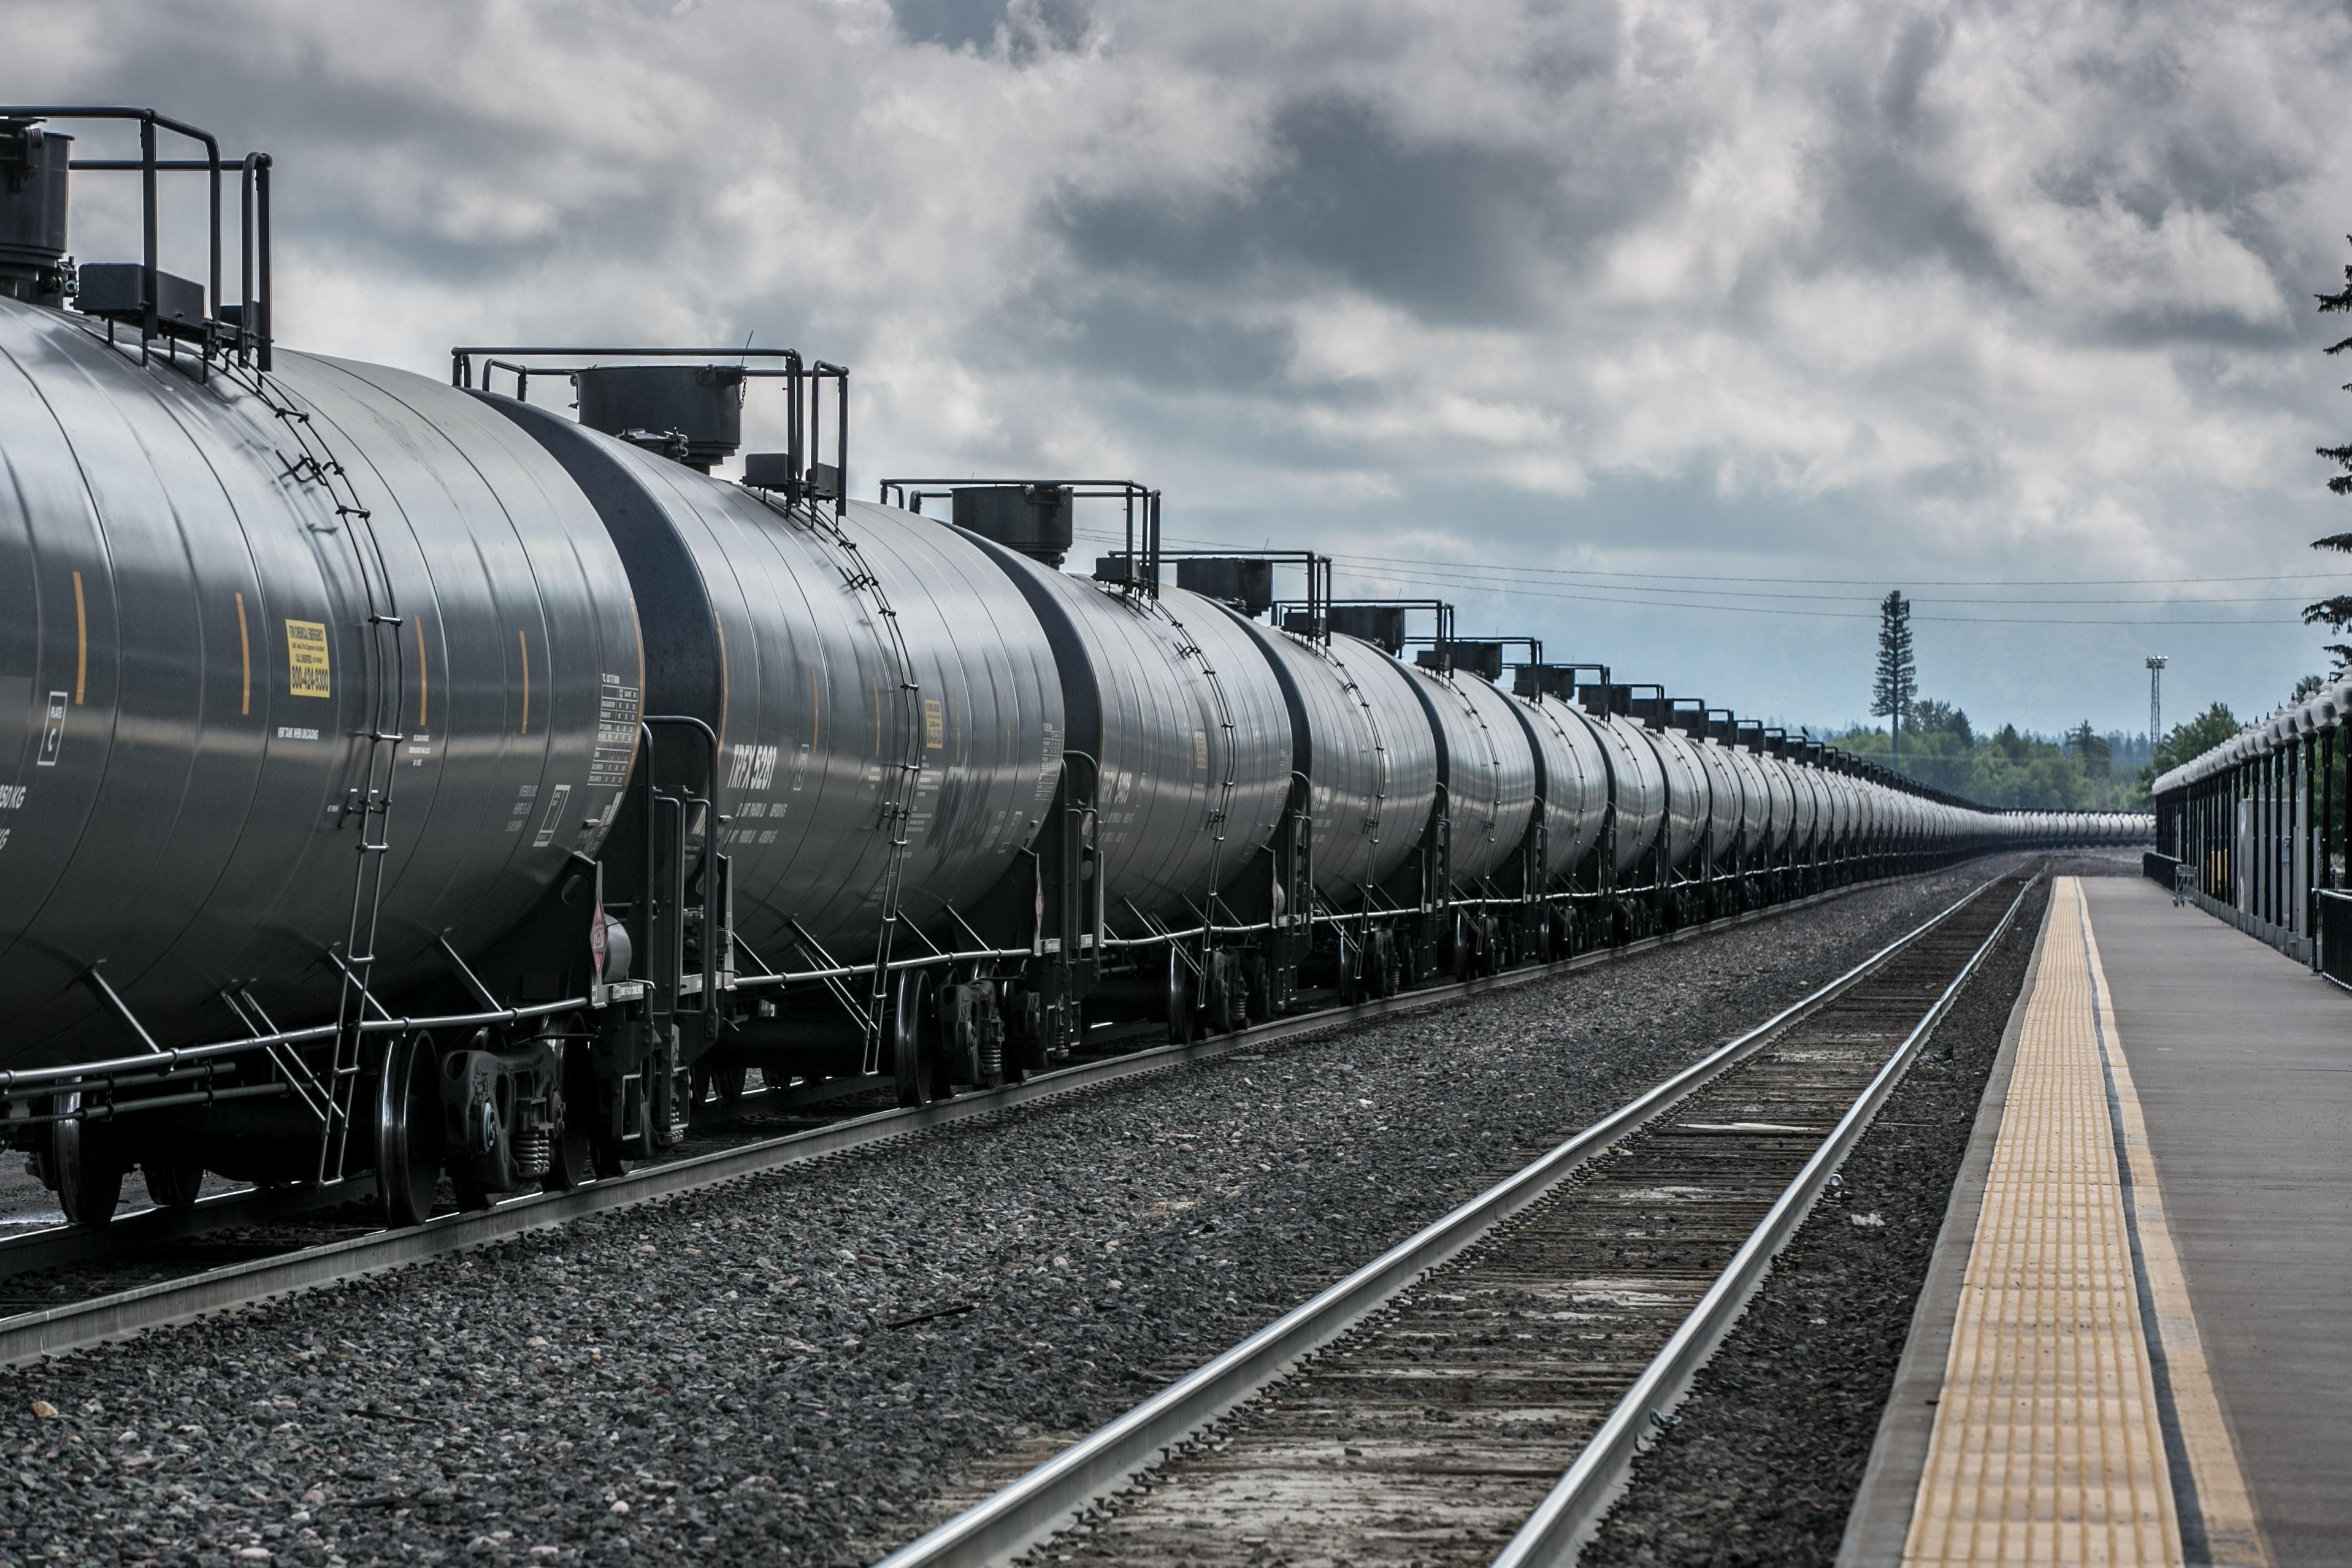 A BNSF freight train hauling tankers loaded with crude oil heads west through a transcontinental railroad hub on June 22, 2018 in Whitefish, Montana, home to Glacier National Park.